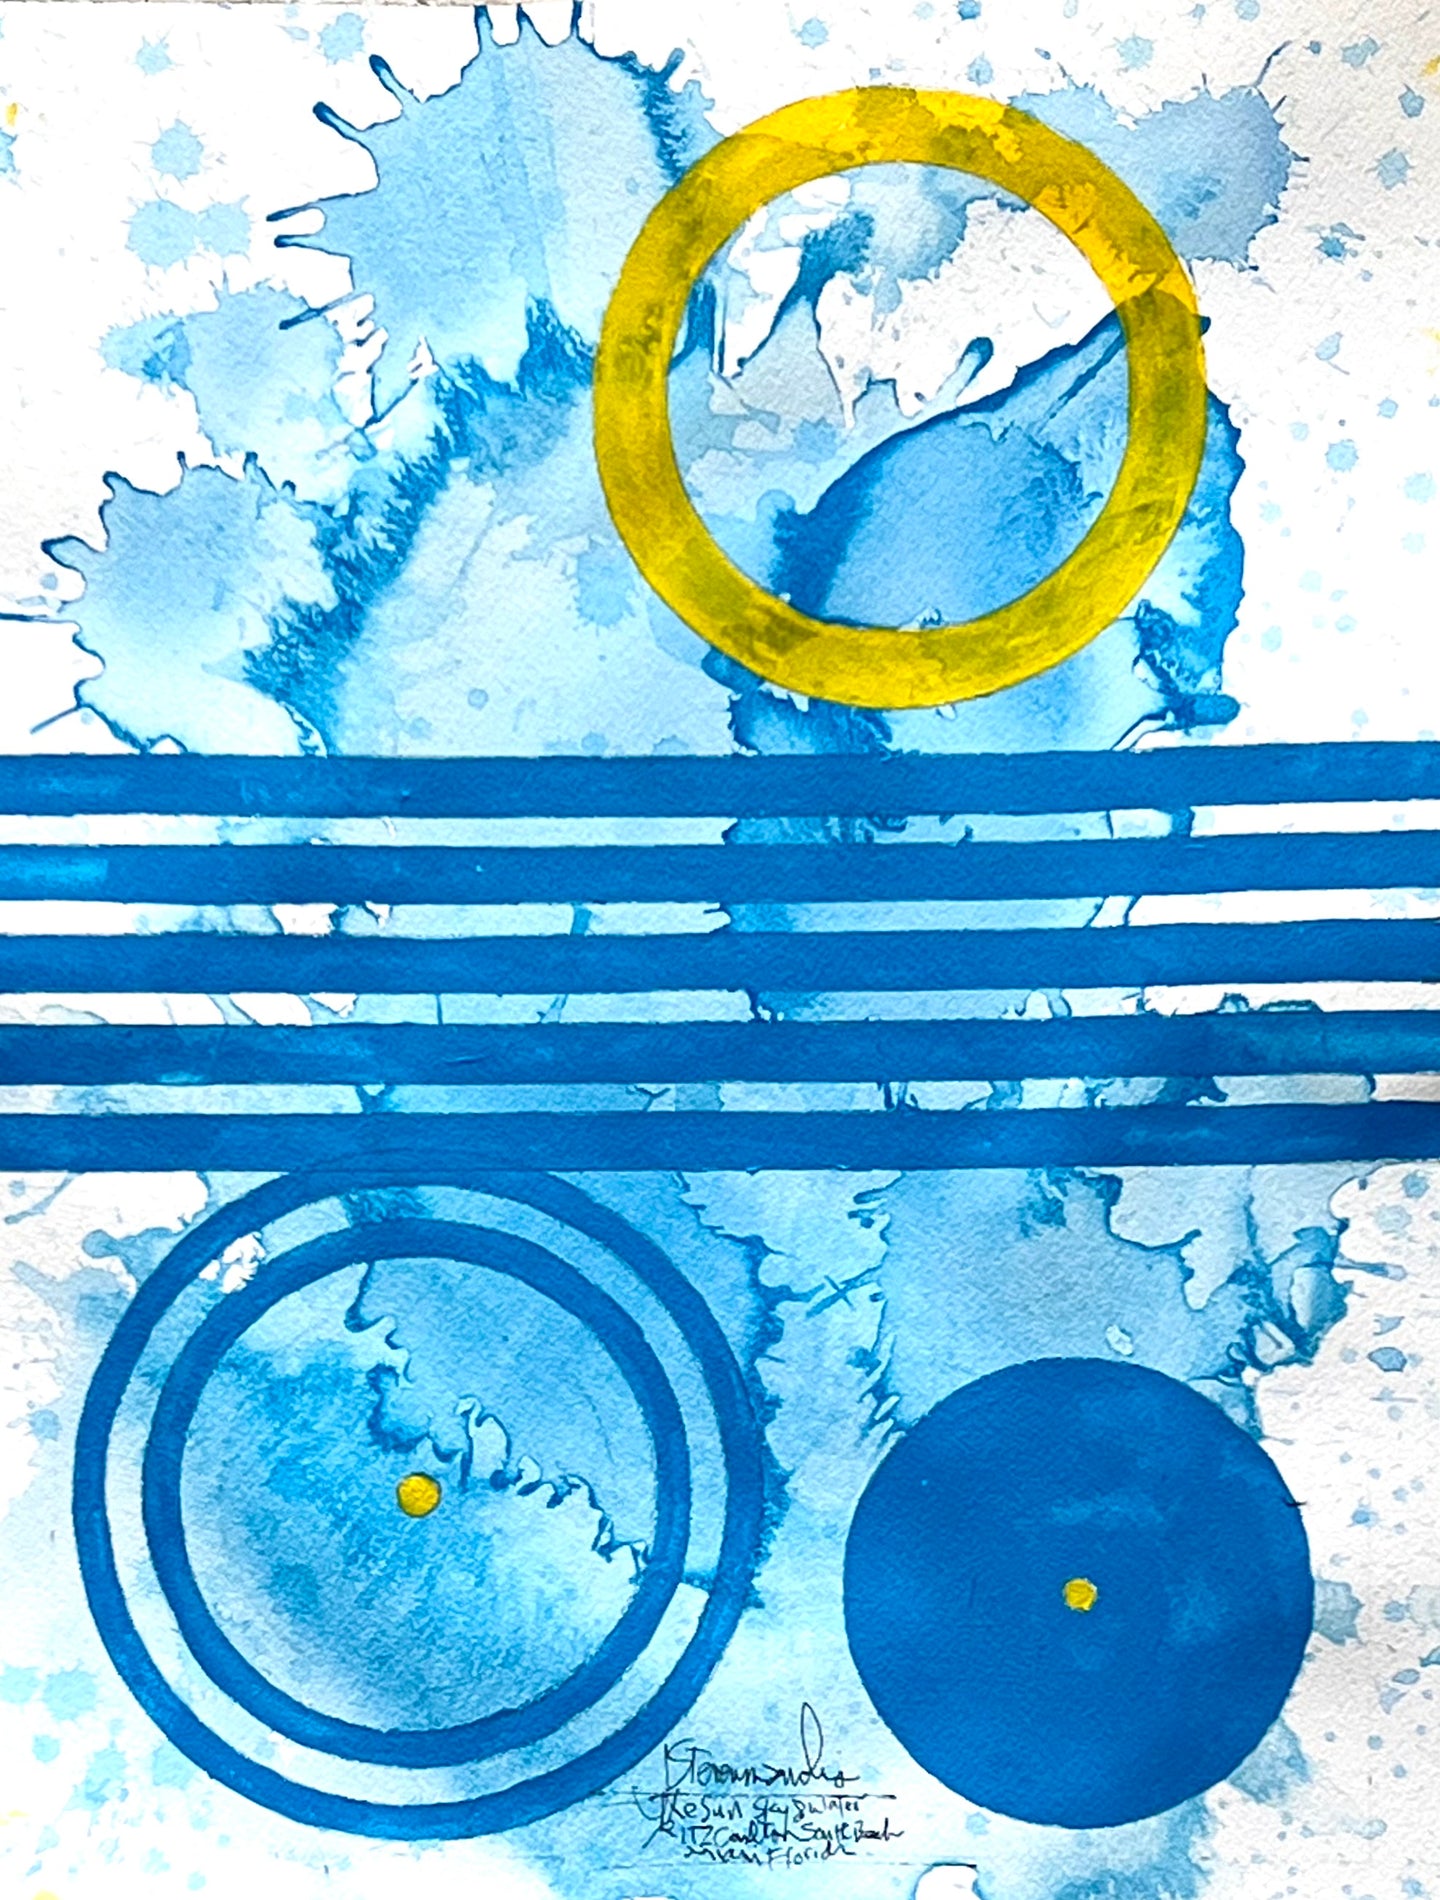 J. Steven Manolis' blue and yellow Abstract expressionist painting, 